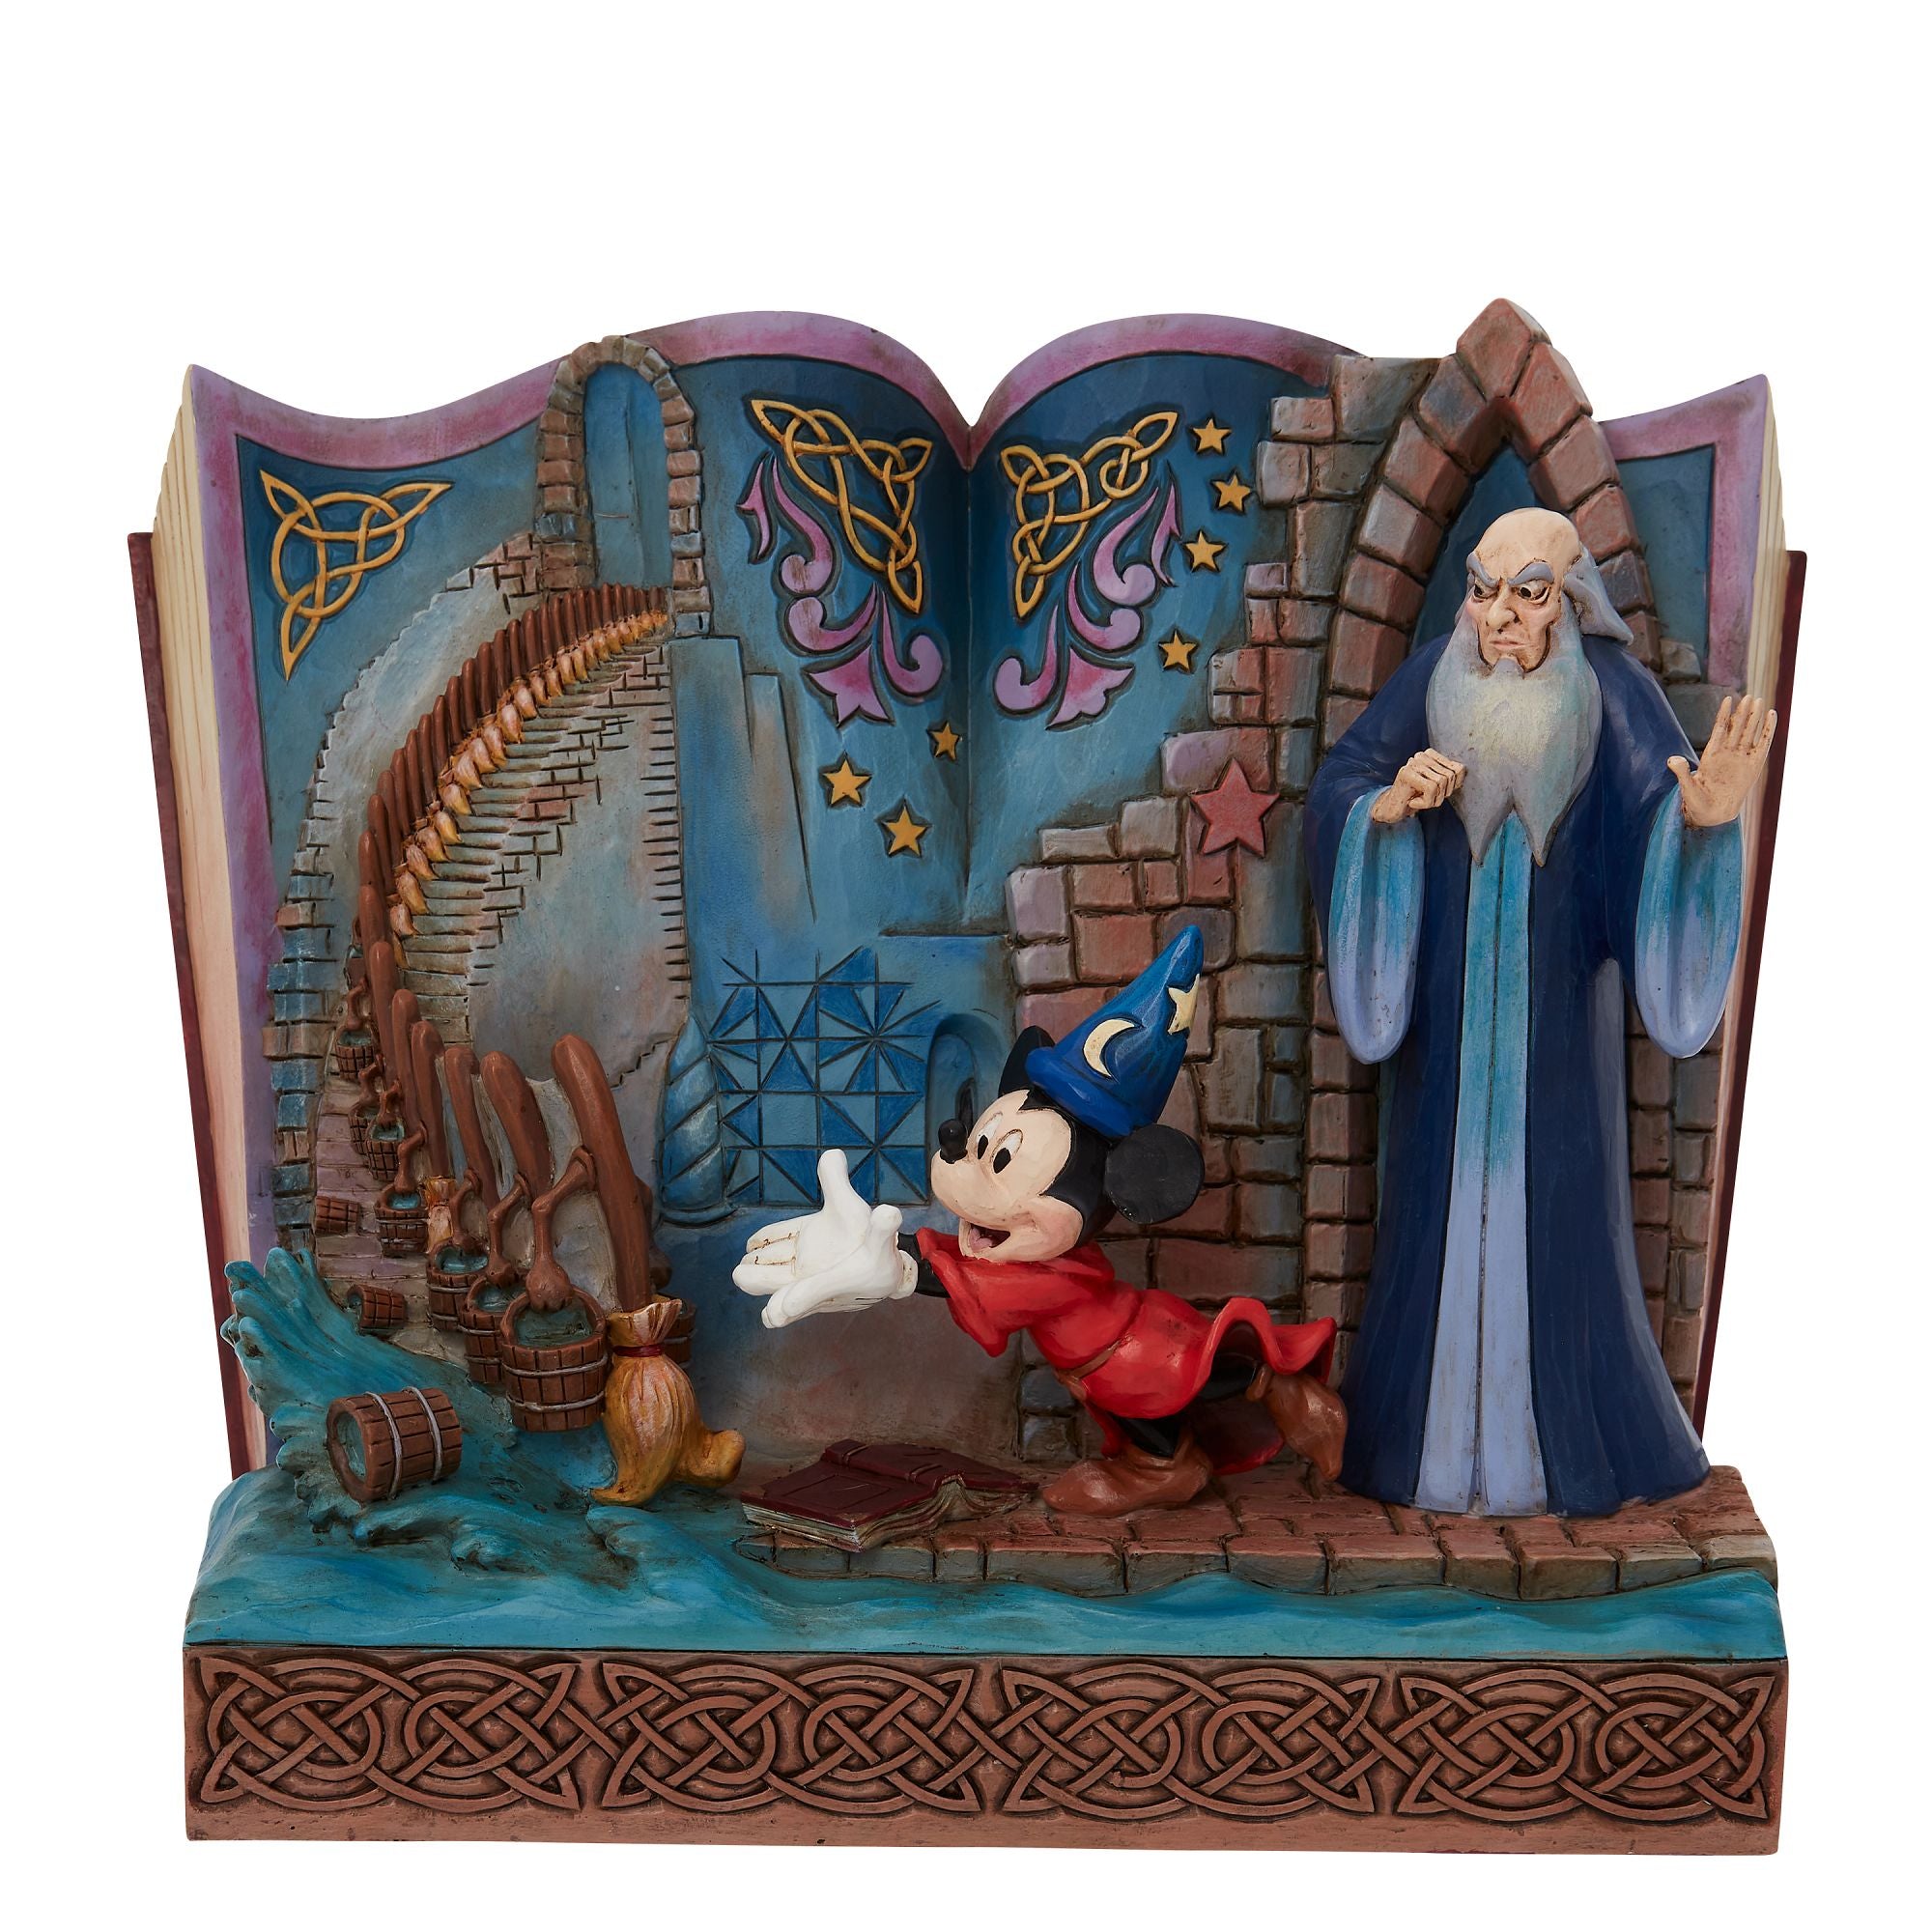 Disney Traditions Figurine - Sorcerer Mickey Story Book